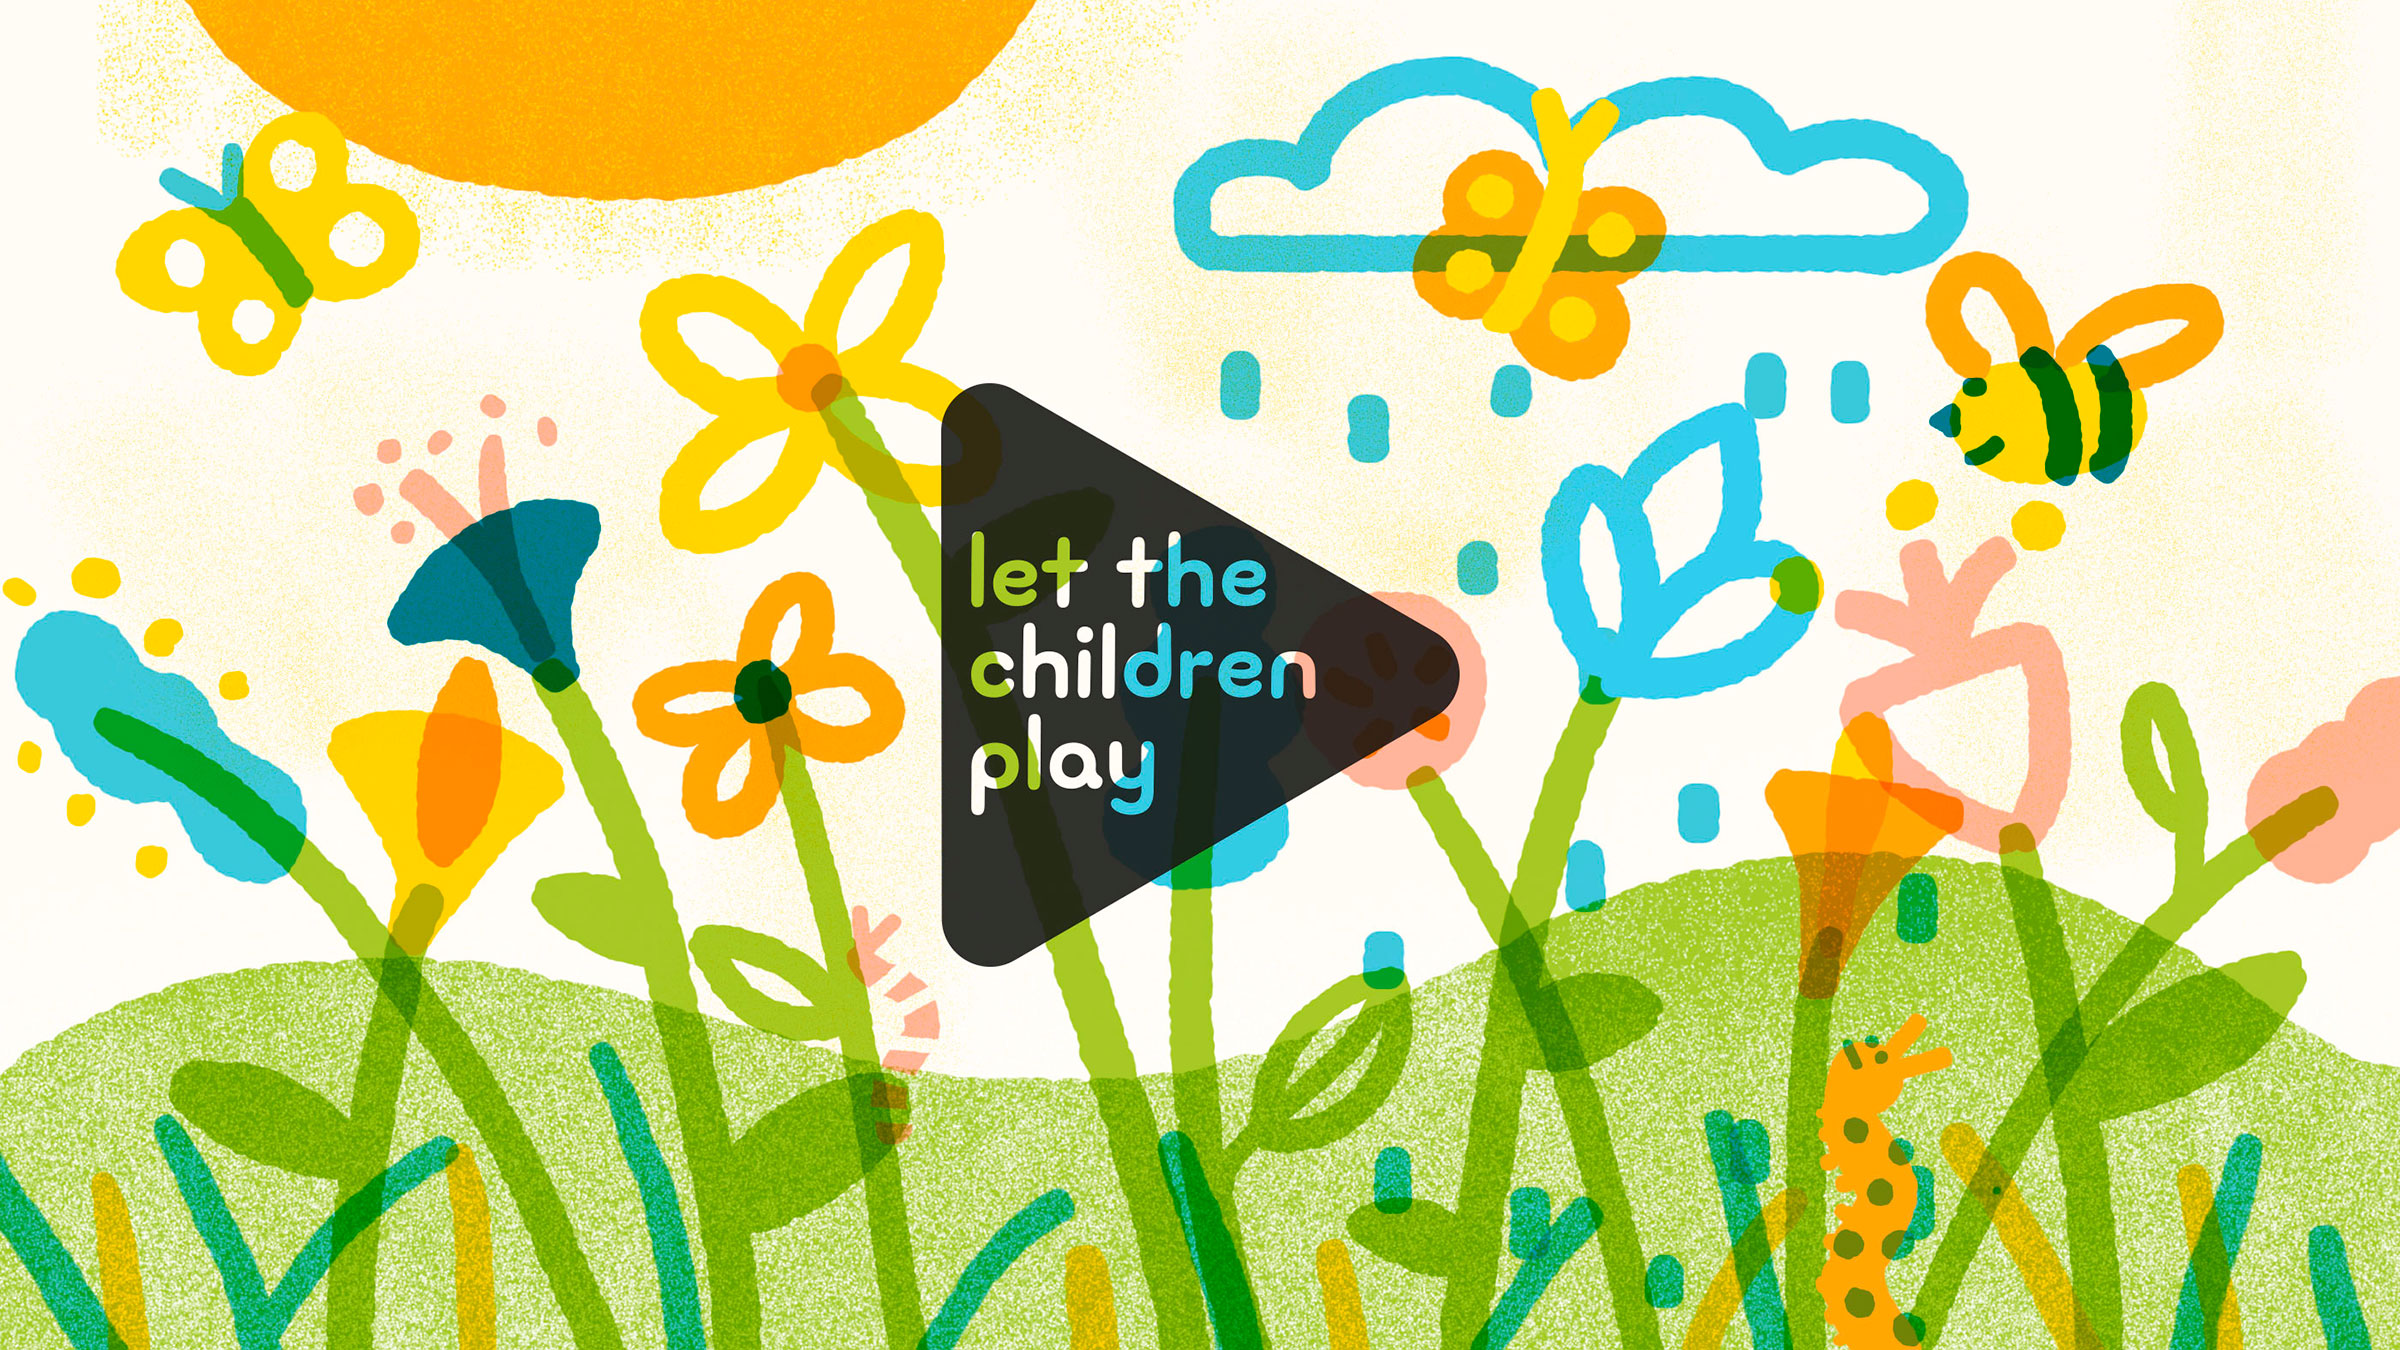 RPS - Let the children play - Spring